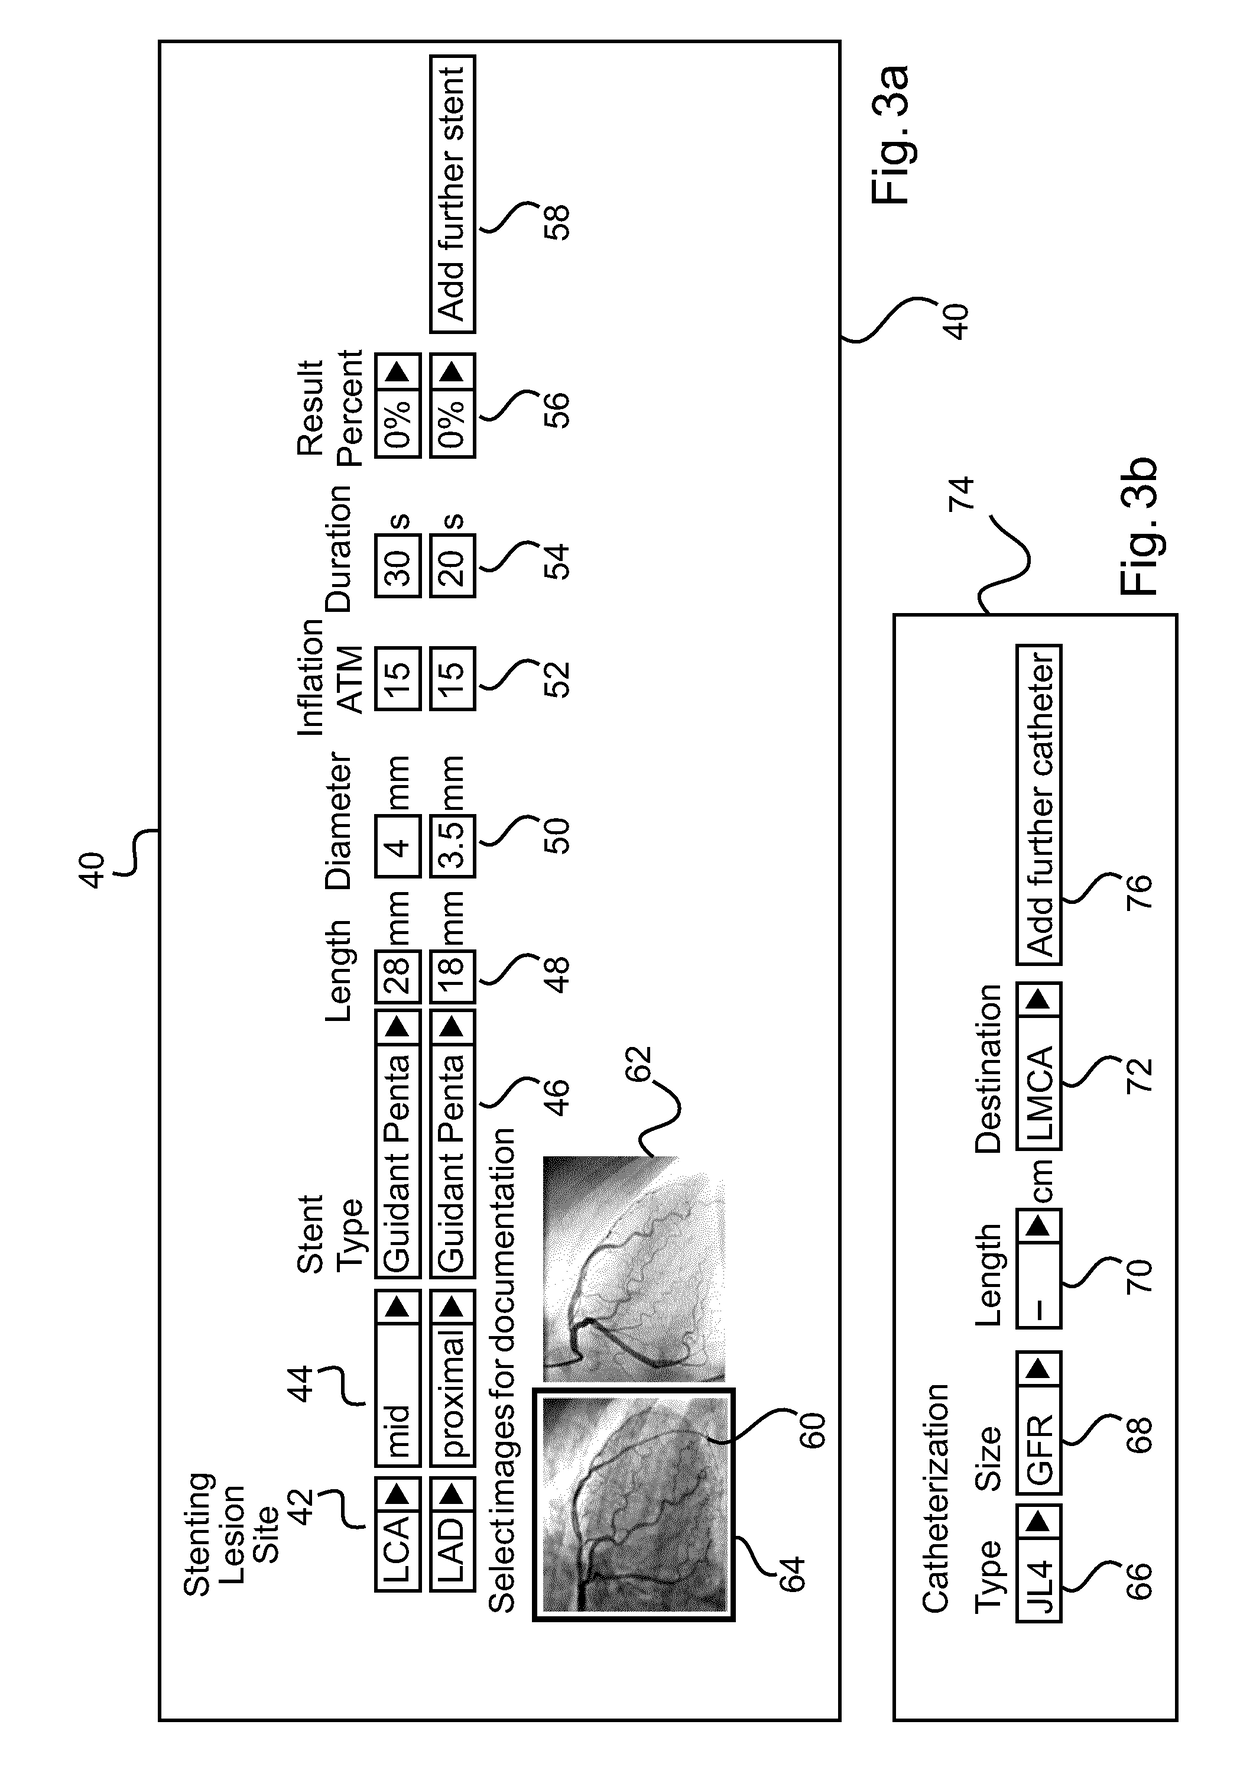 Interventional medical reporting apparatus